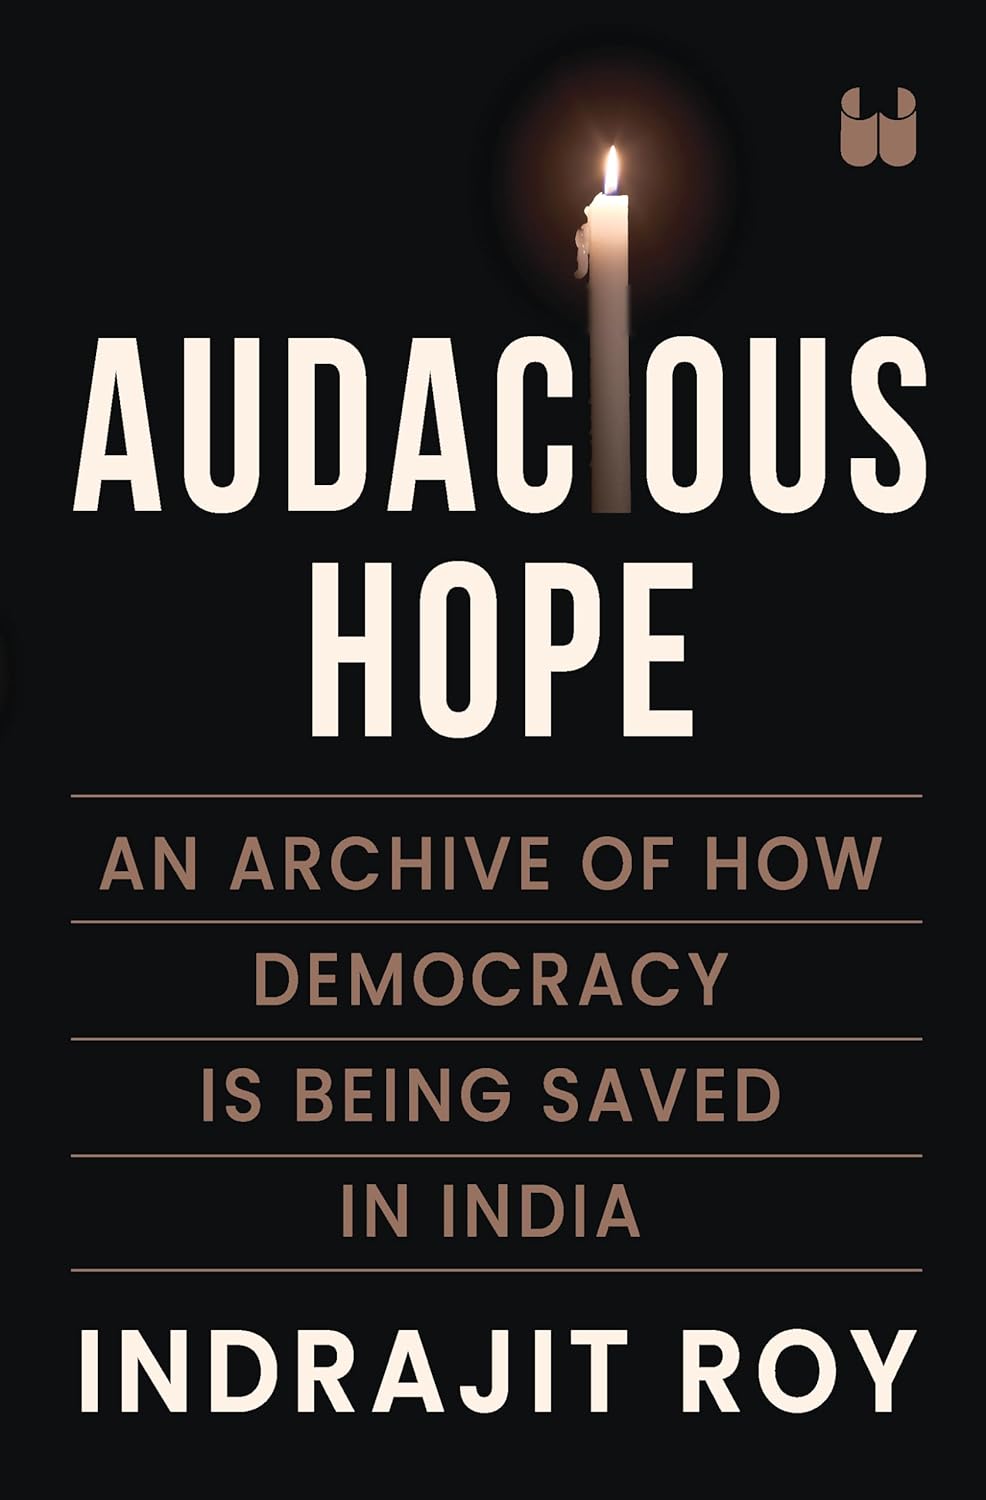 Audacious Hope: An Archive of How Democracy is Being Saved in India